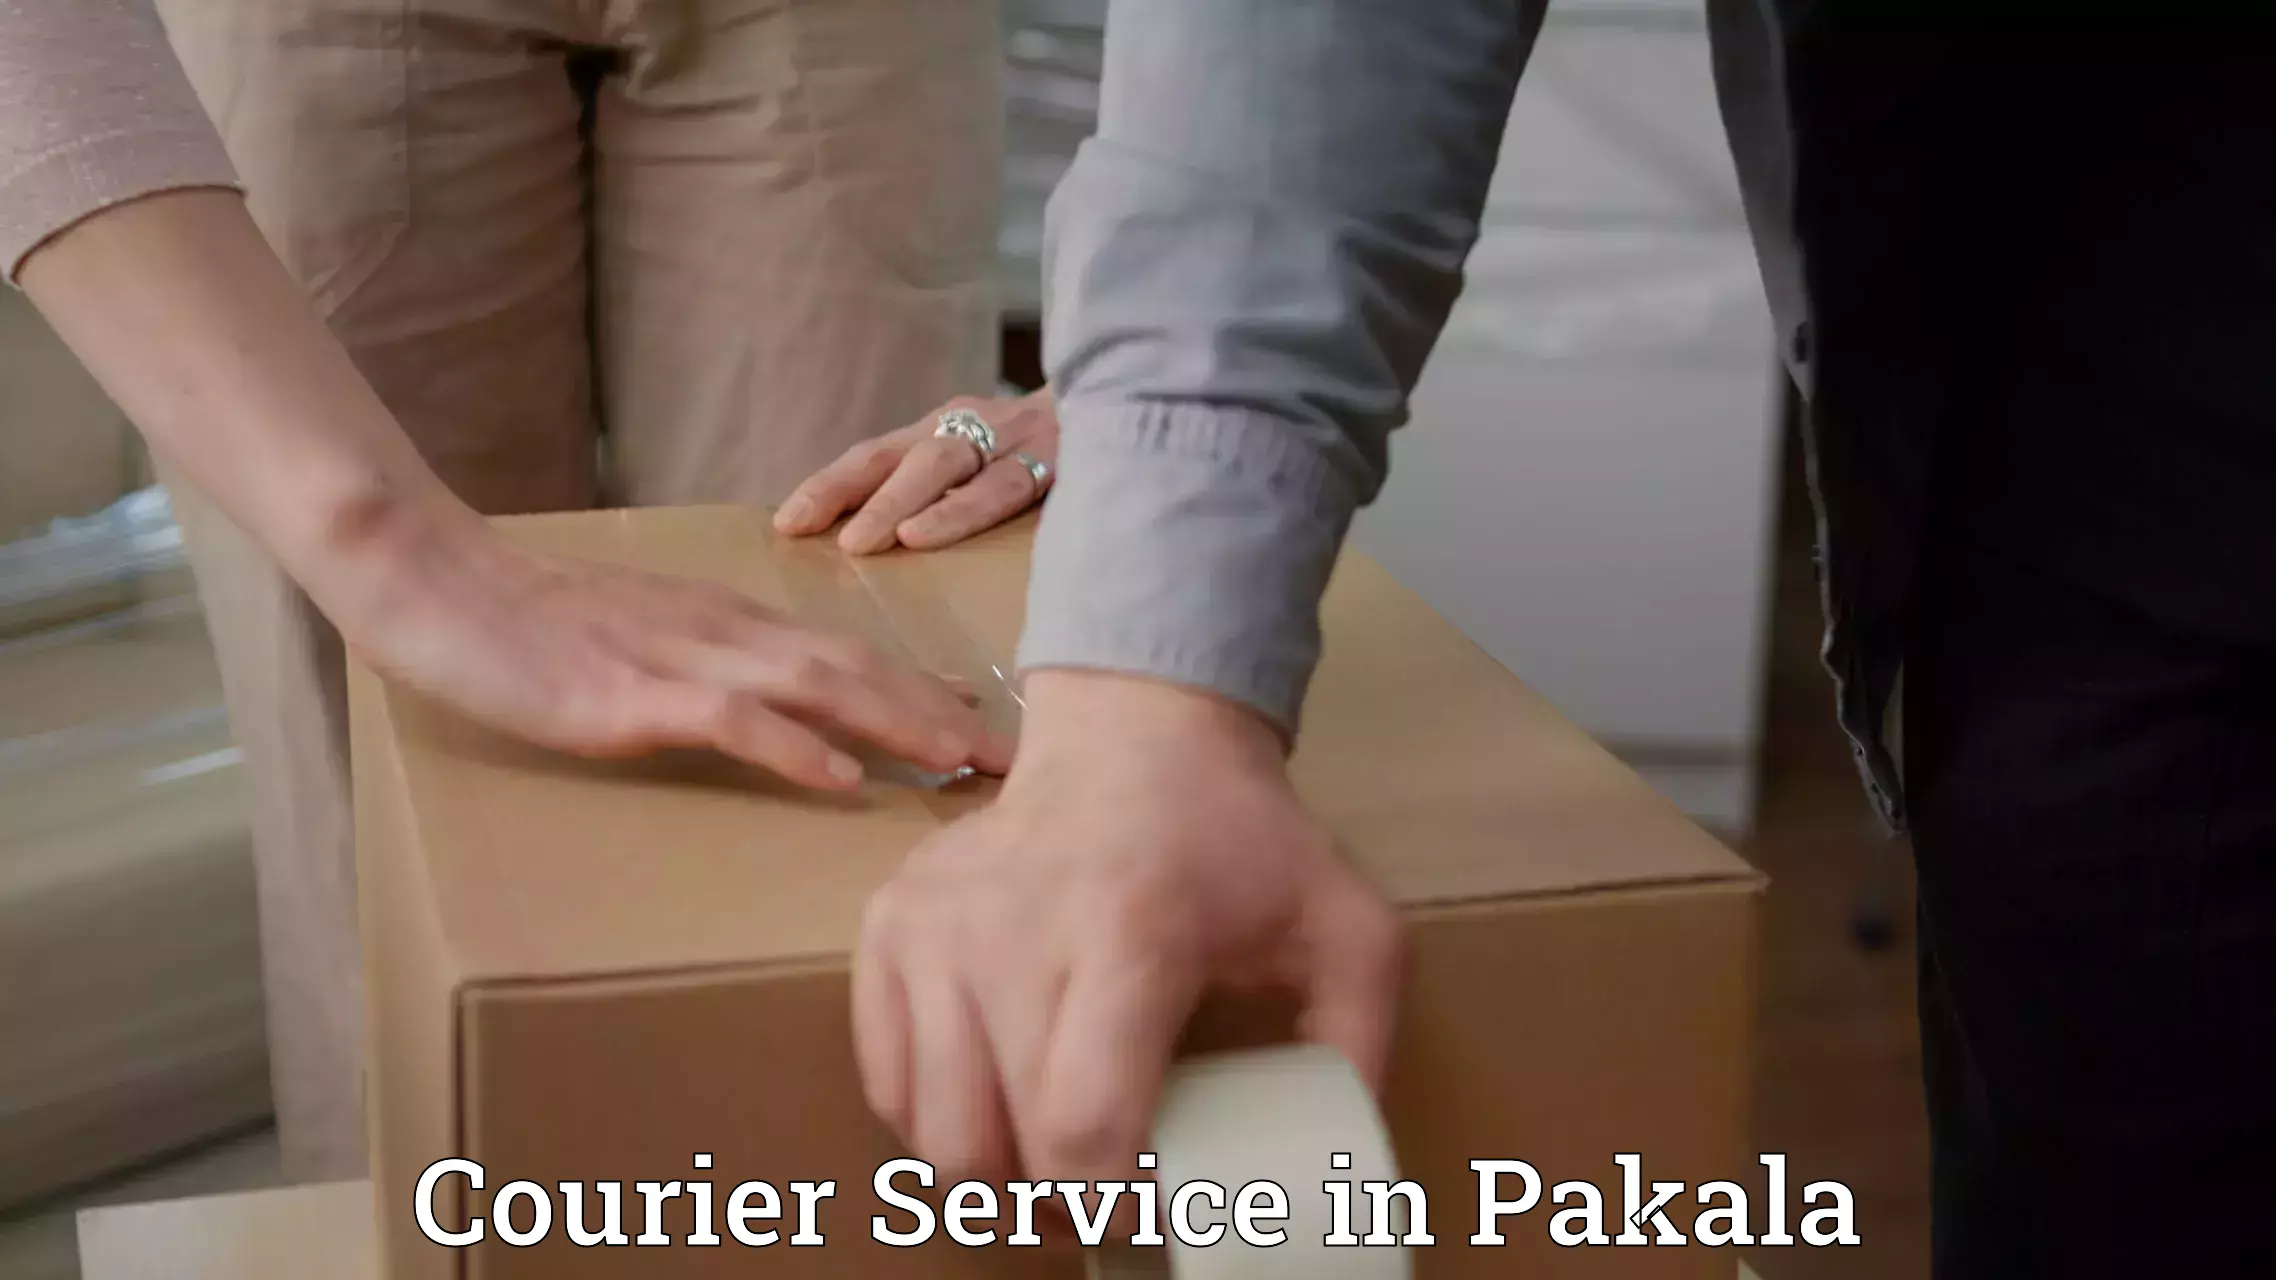 User-friendly delivery service in Pakala